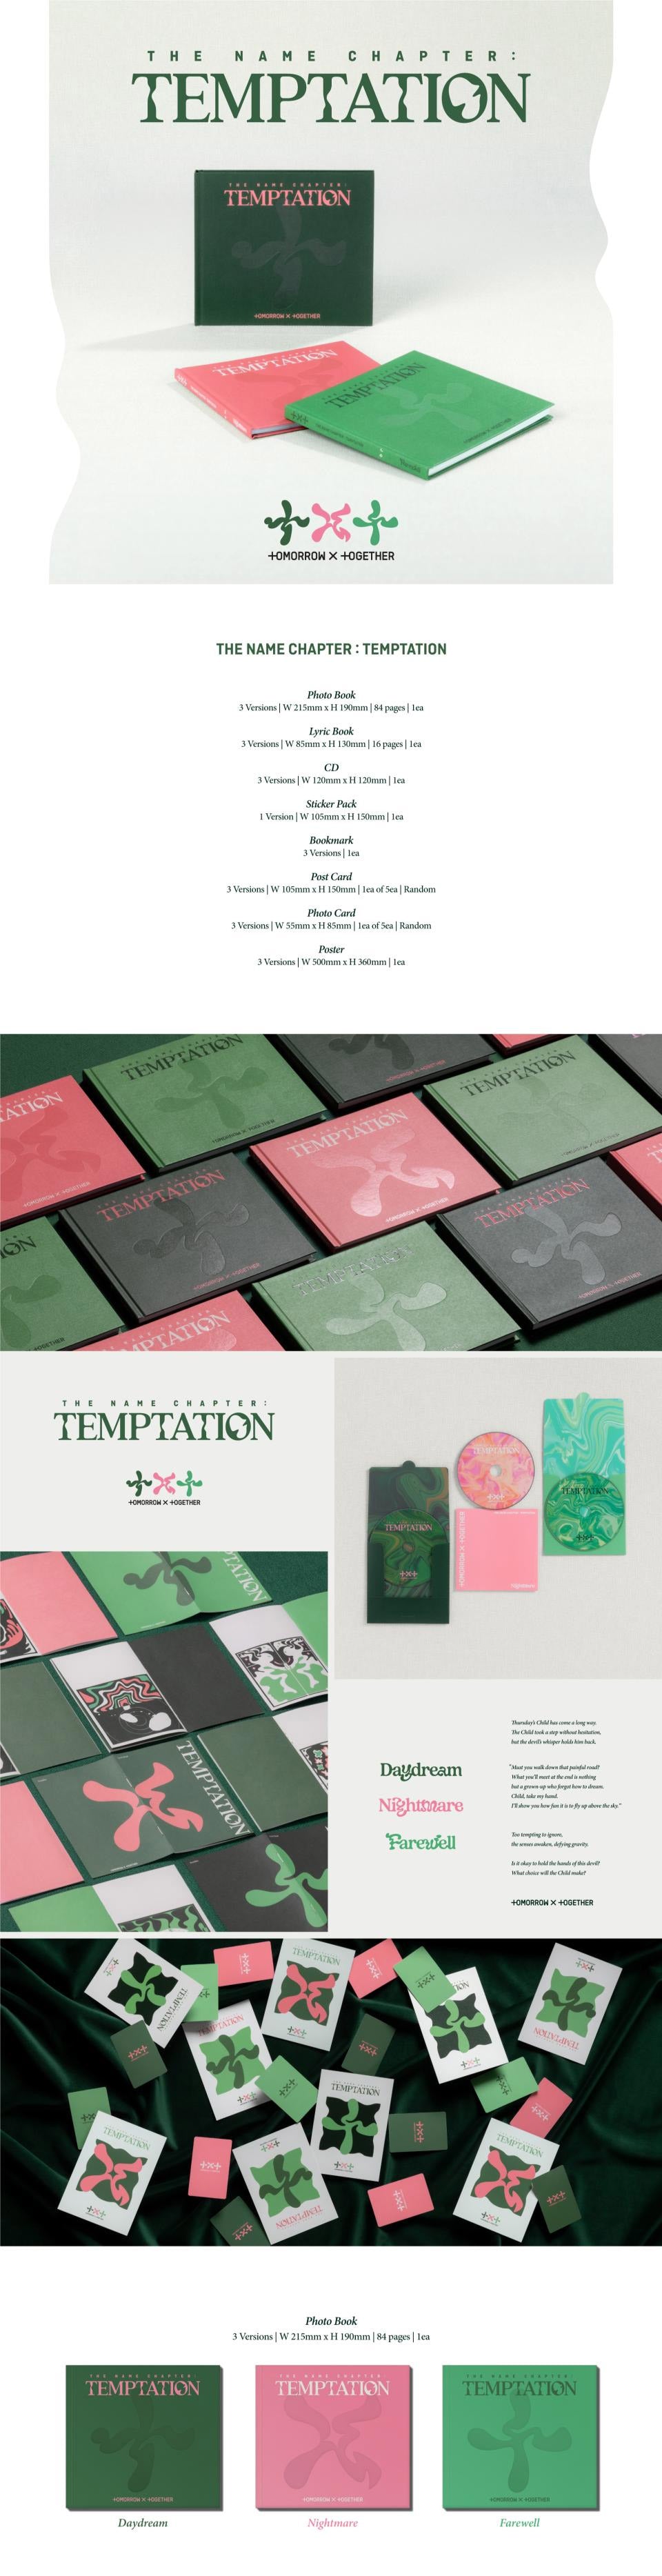 TXT Name Chapter Temptation Lucky Draw